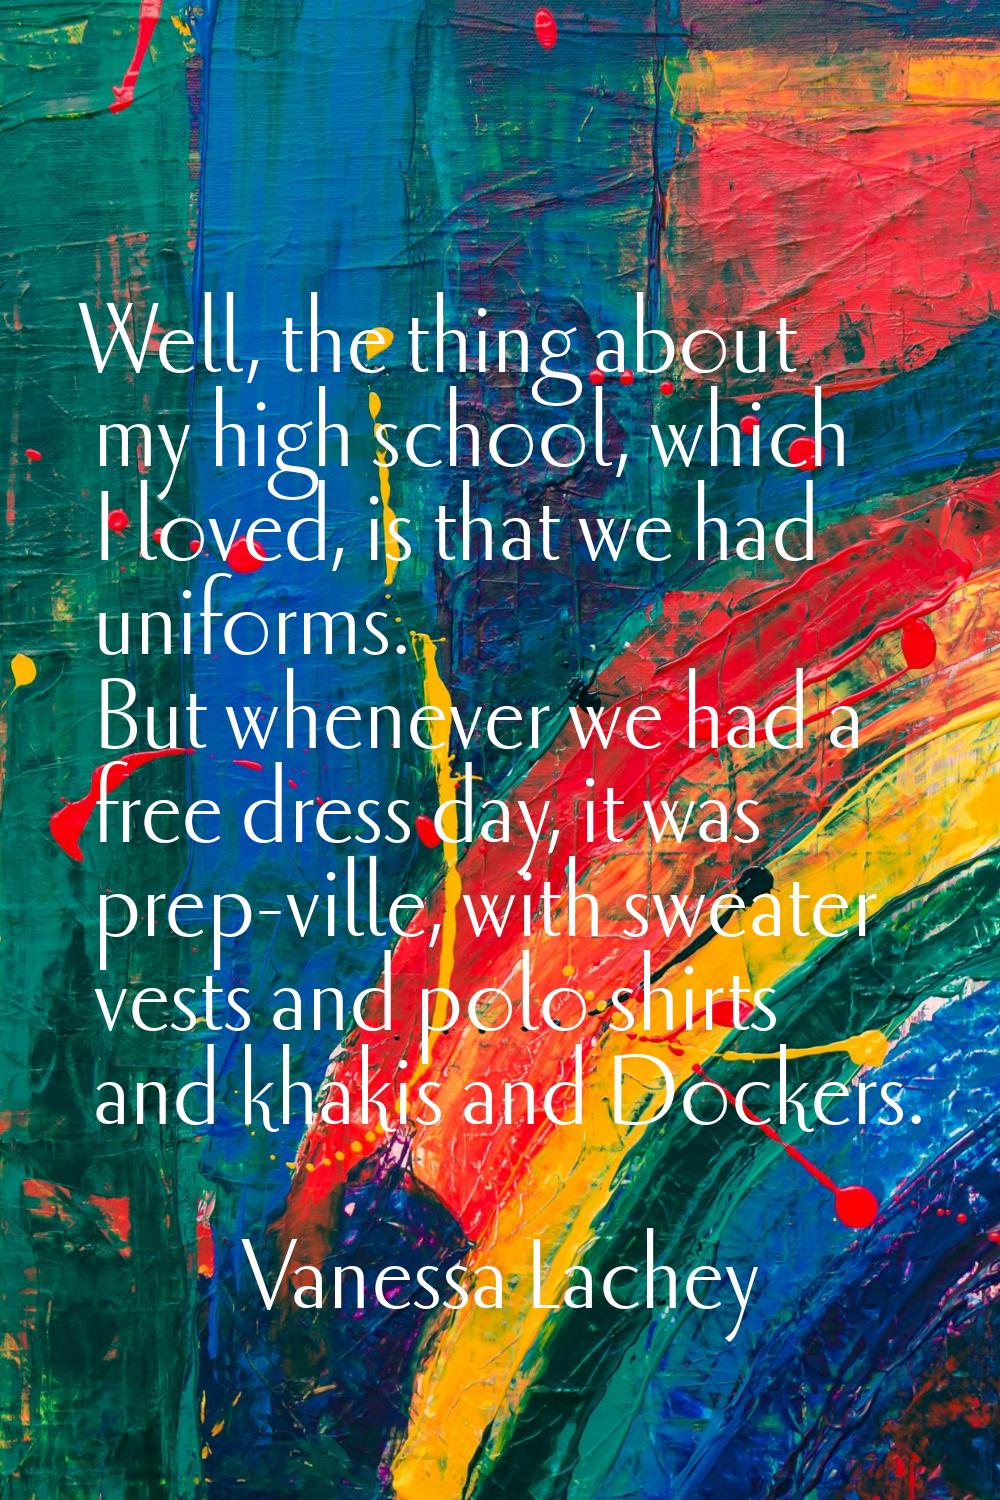 Well, the thing about my high school, which I loved, is that we had uniforms. But whenever we had a